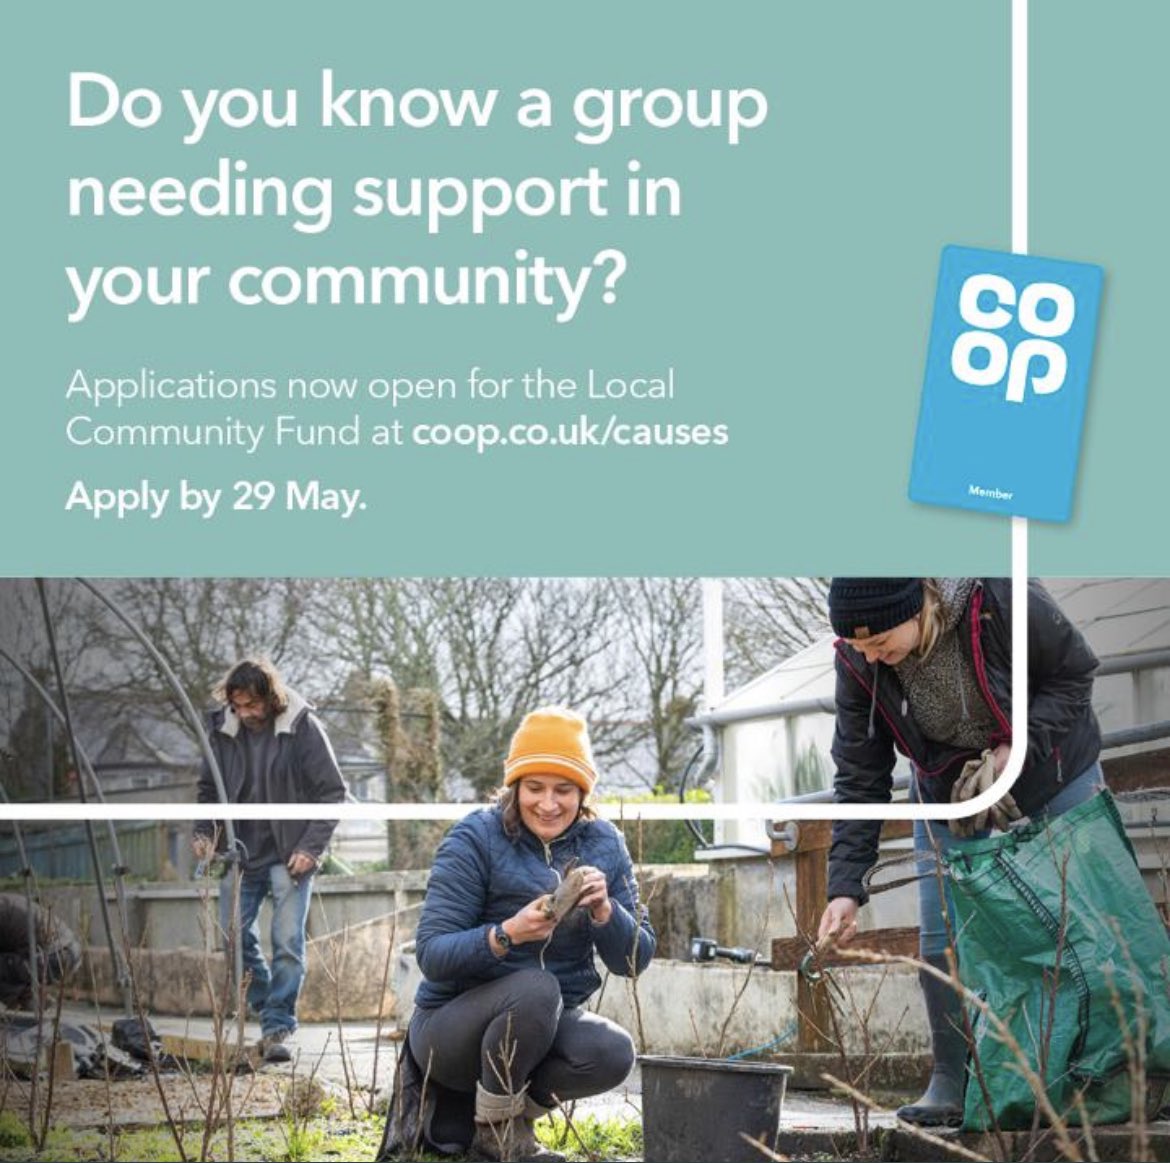 Last week to apply for @coopuk Local Community Fund. If you’re a small community group looking to make a difference and need some funding apply at coop.co.uk/causes by 29 May! #Worsley #Swinton #Eccles #Irlam